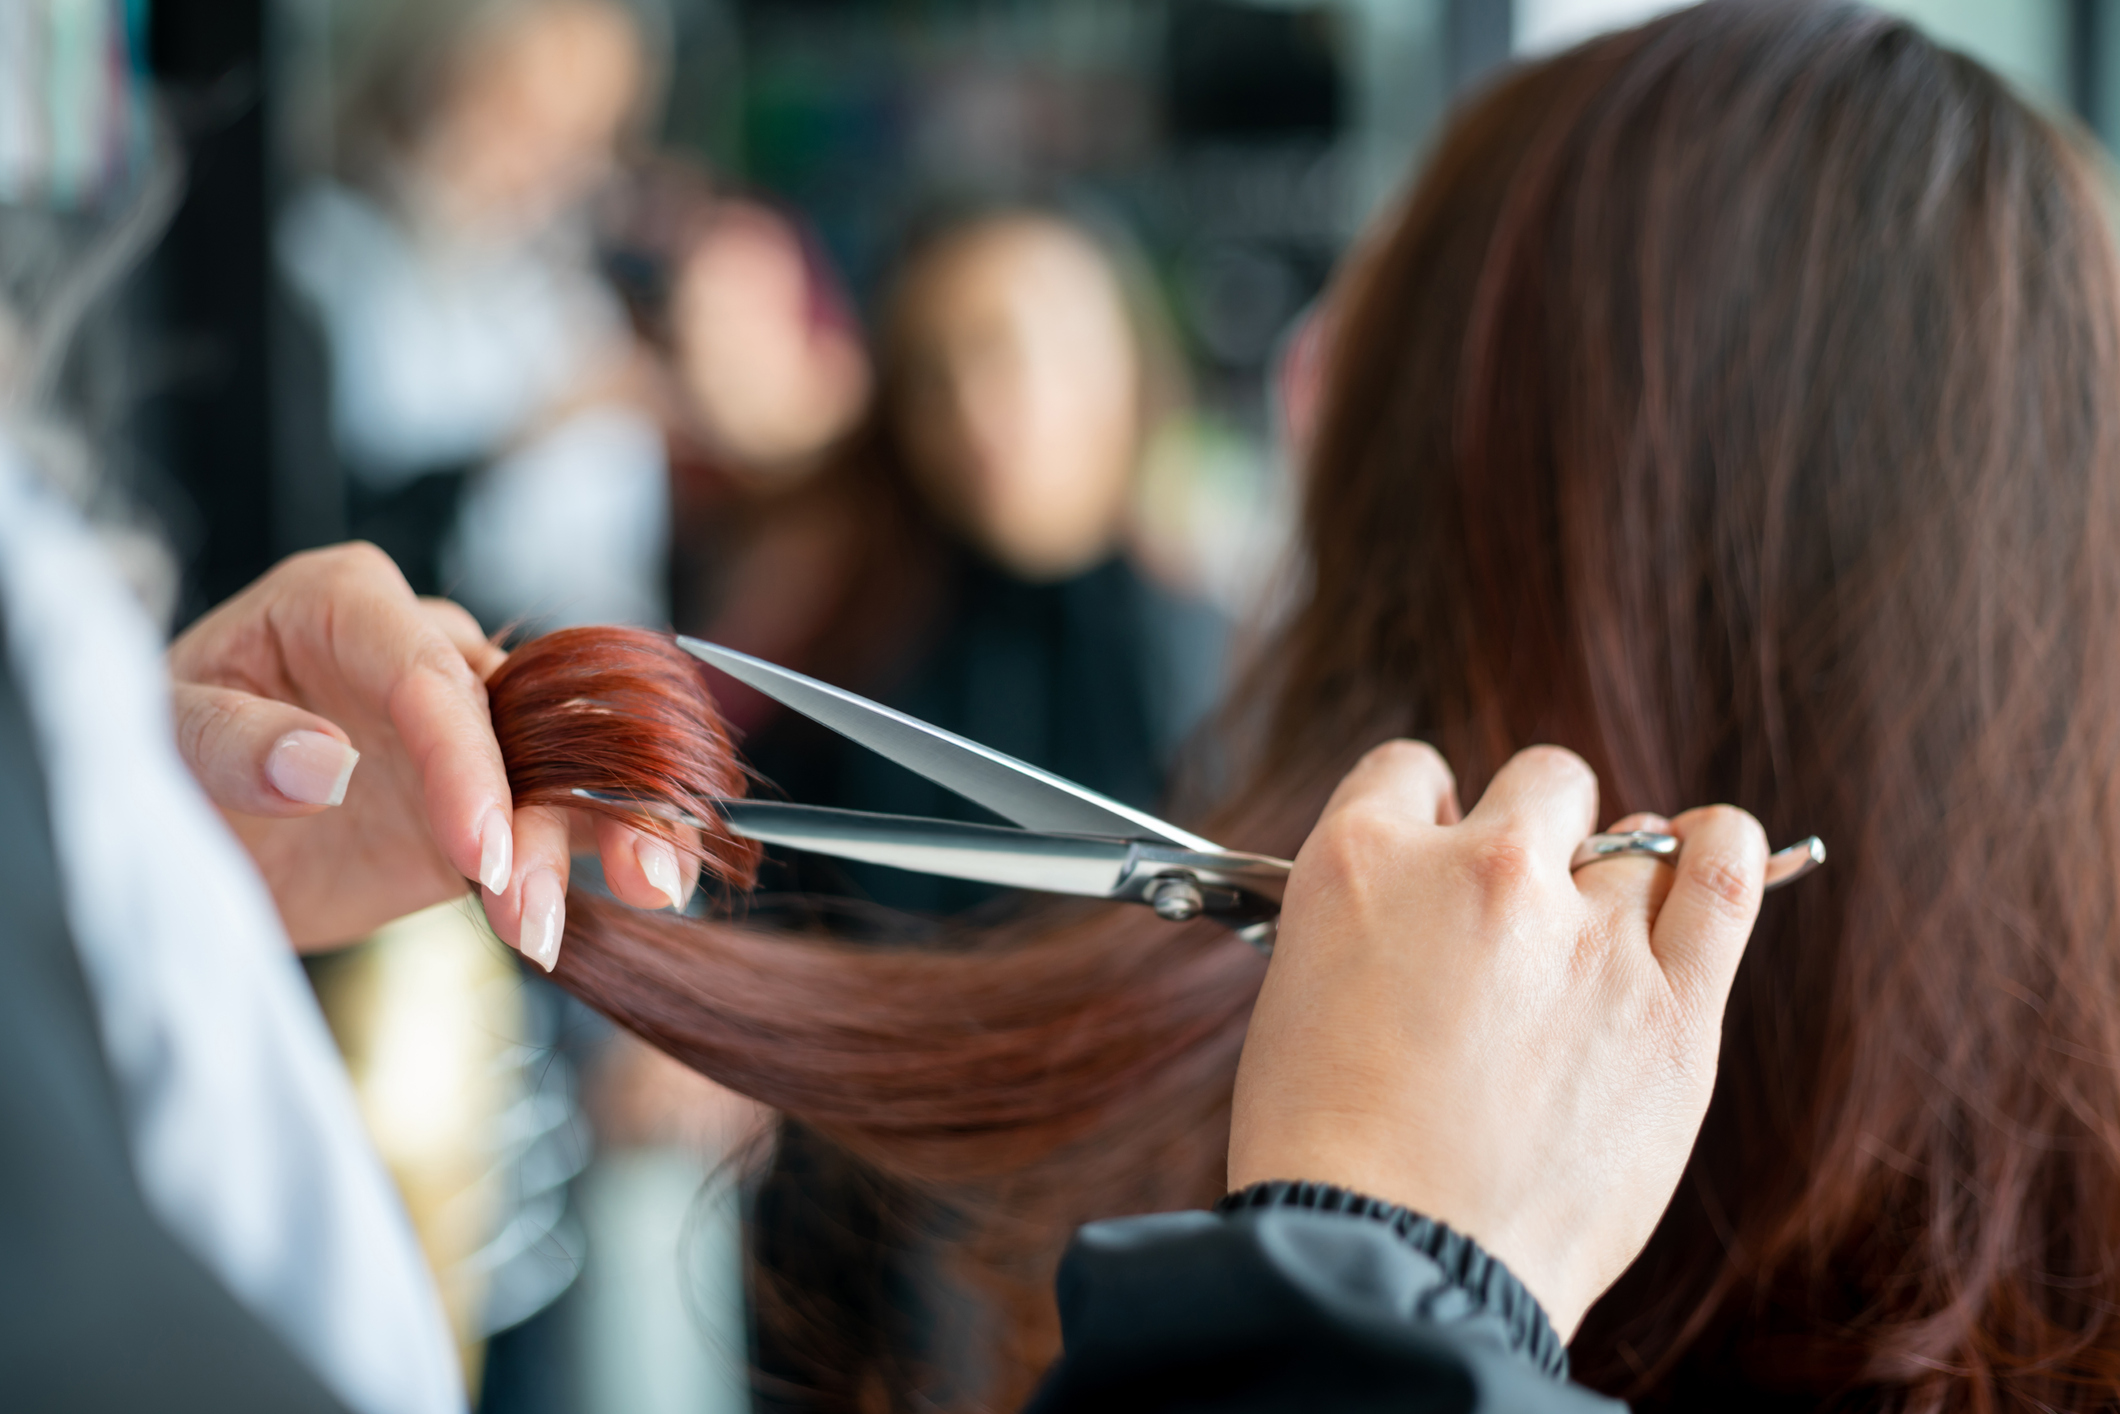 Enjoy Expert Styling at The Hair Bar Plano at Willow Bend Market